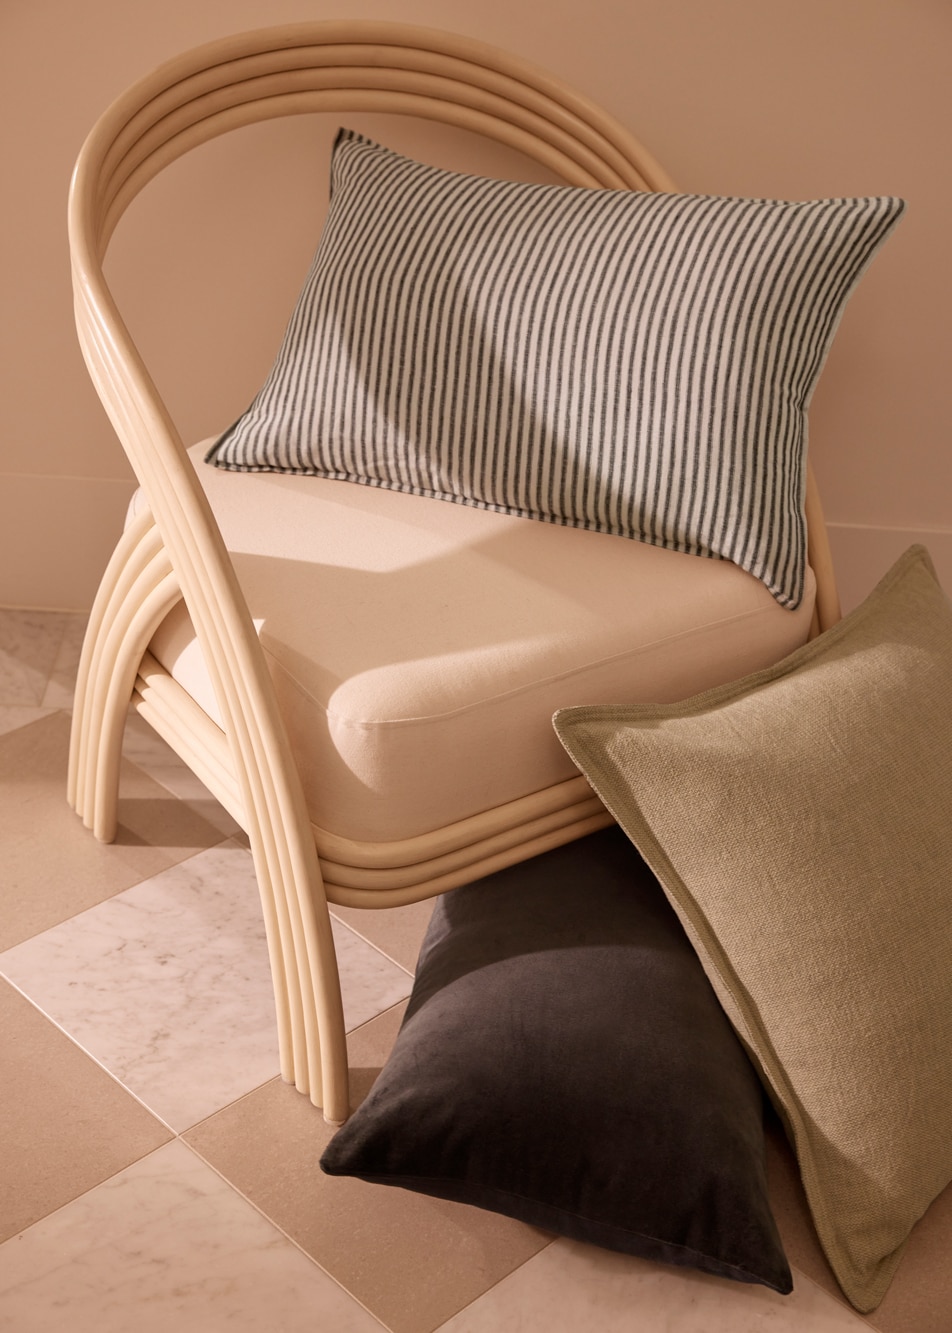 A stack of neutral coloured cushions on top of and next to a wooden chair